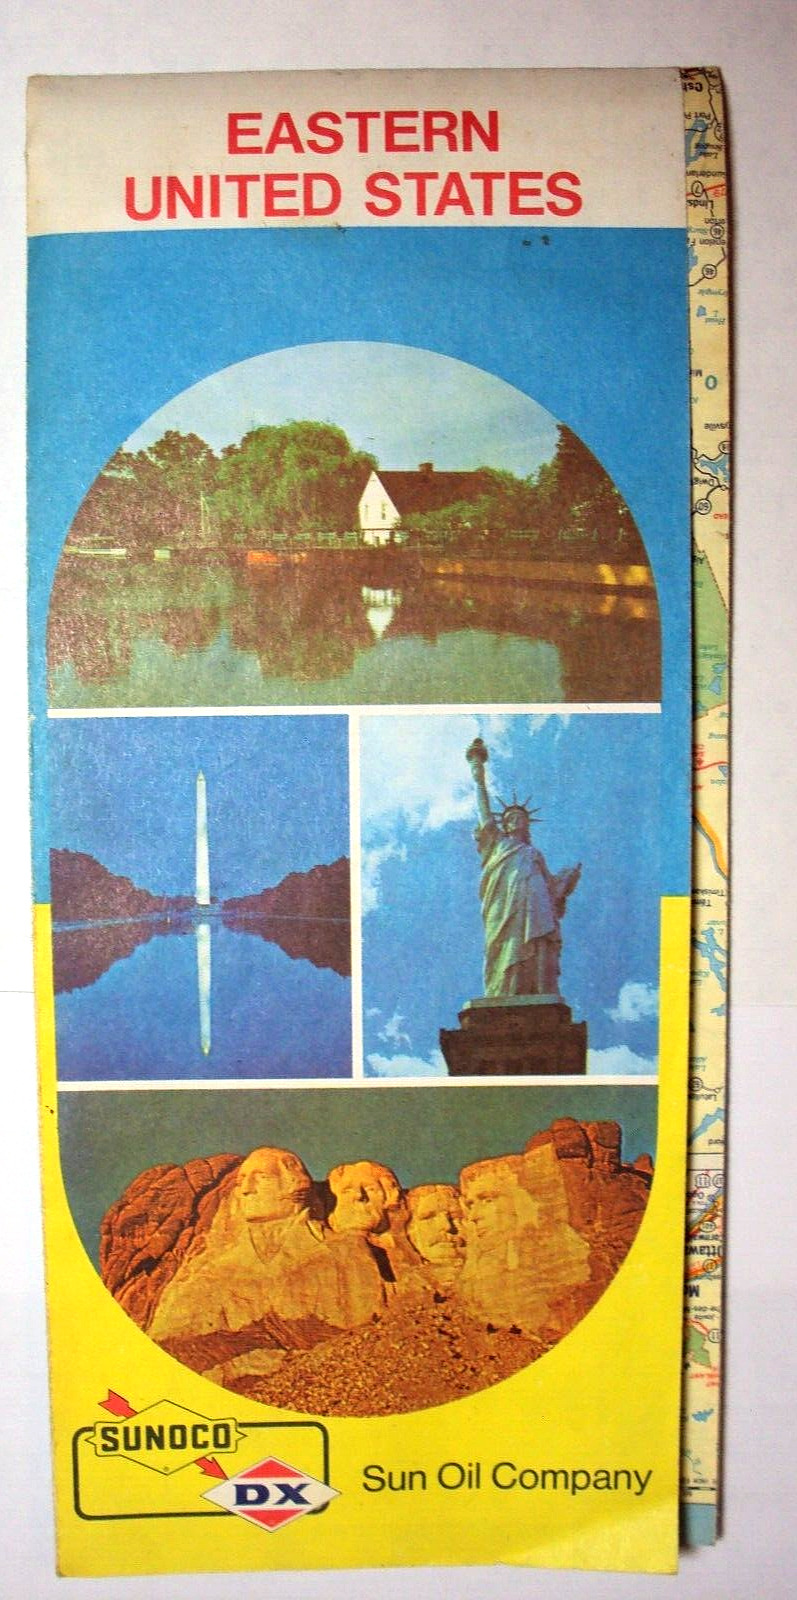 EASTERN UNITED STATES ROAD MAP 1972 1973 SUNOCO DX SUN OIL COMPANY VINTAGE